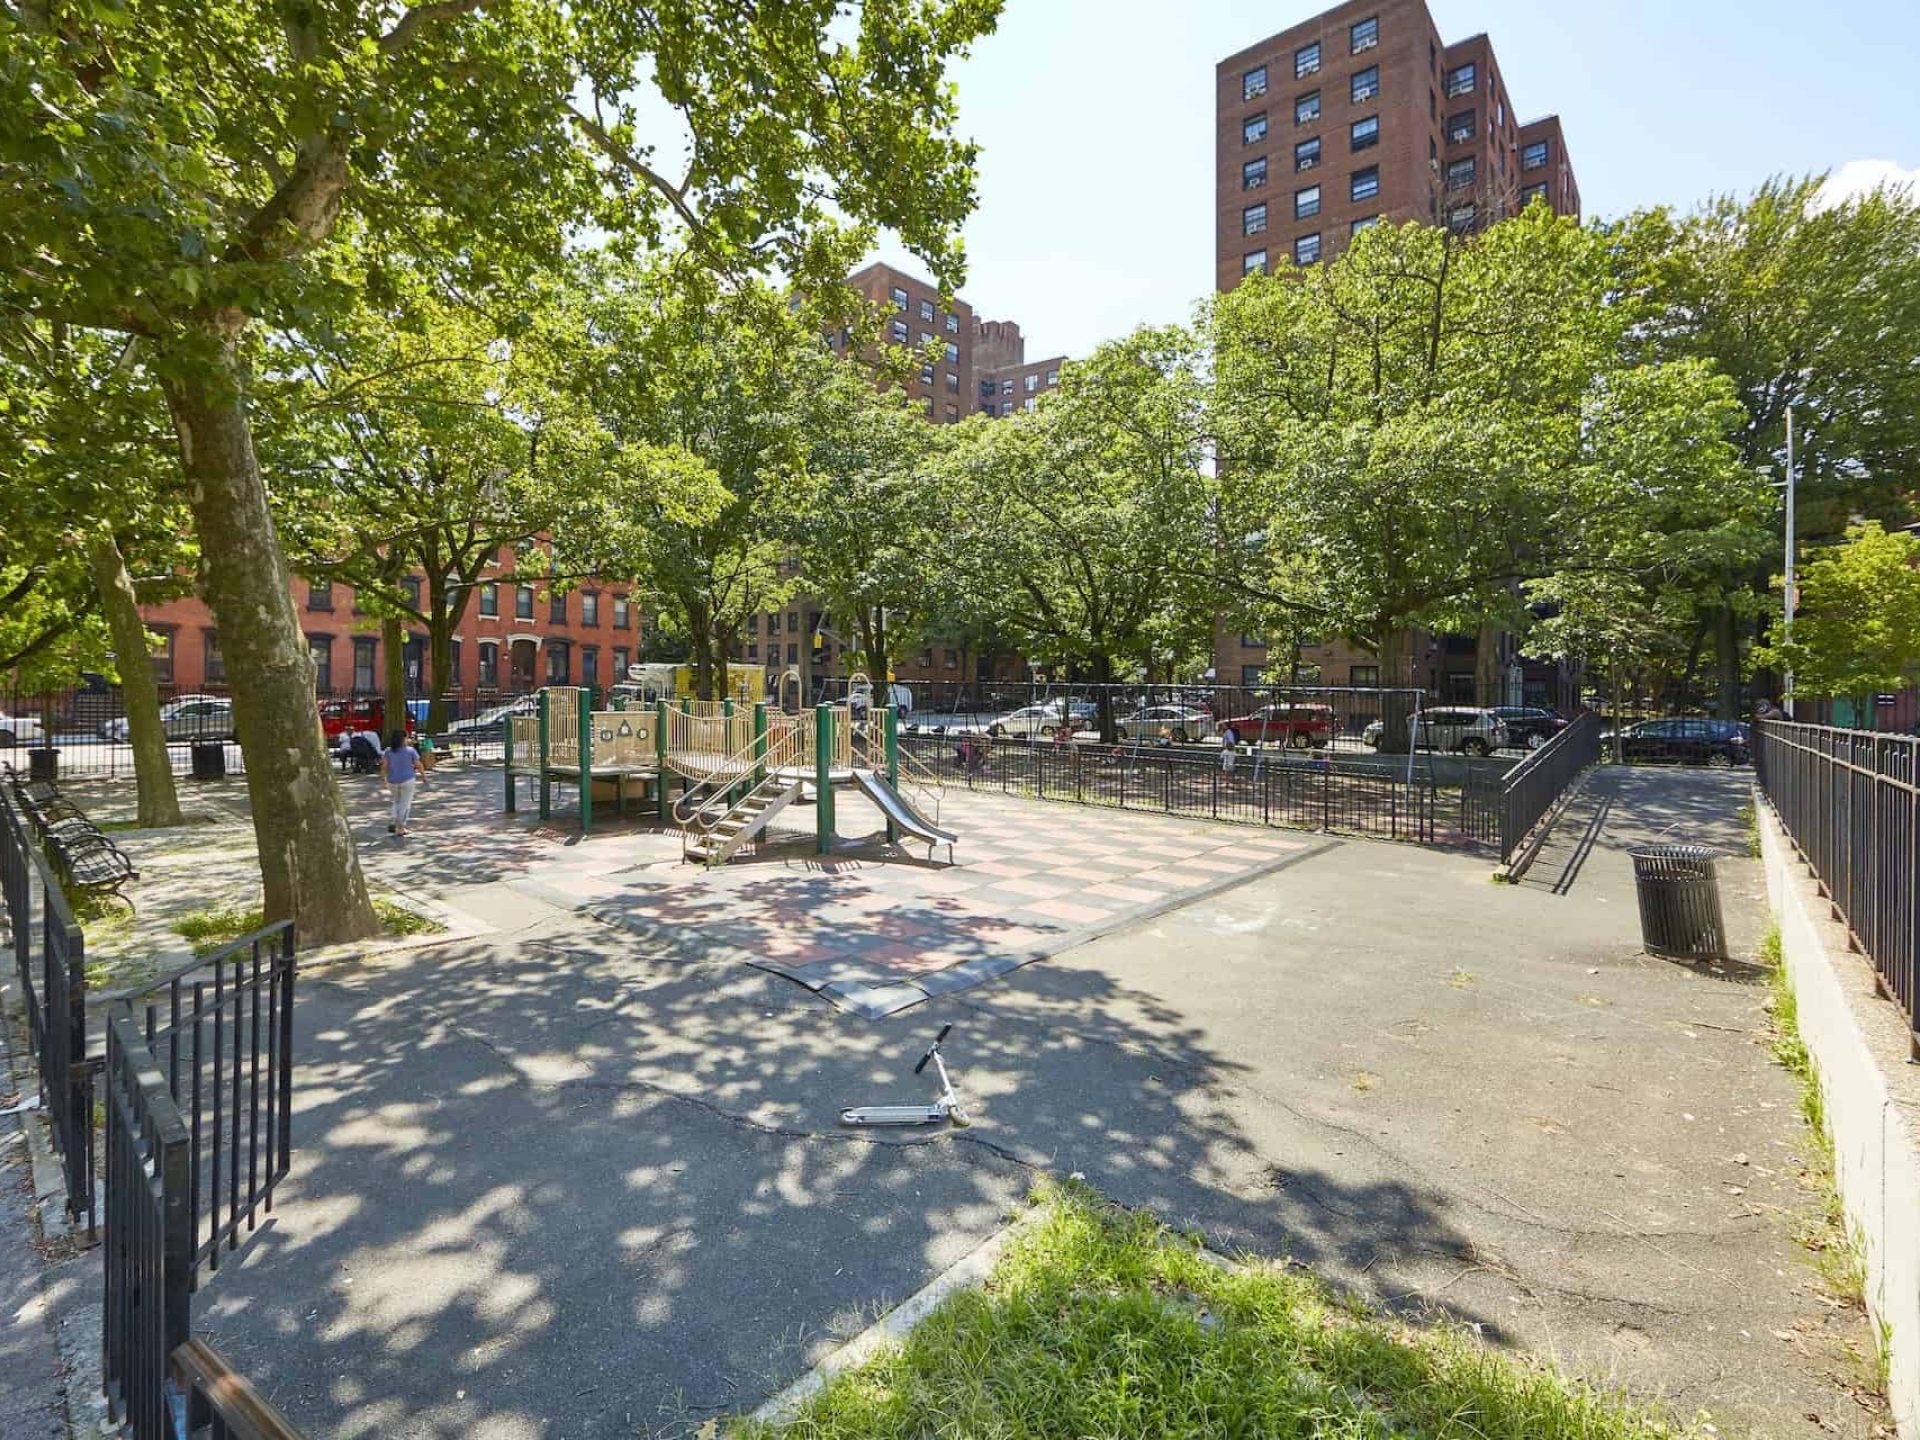 City park and playground in New York City with play set on a checkered rubber mat and swing sets in the background.